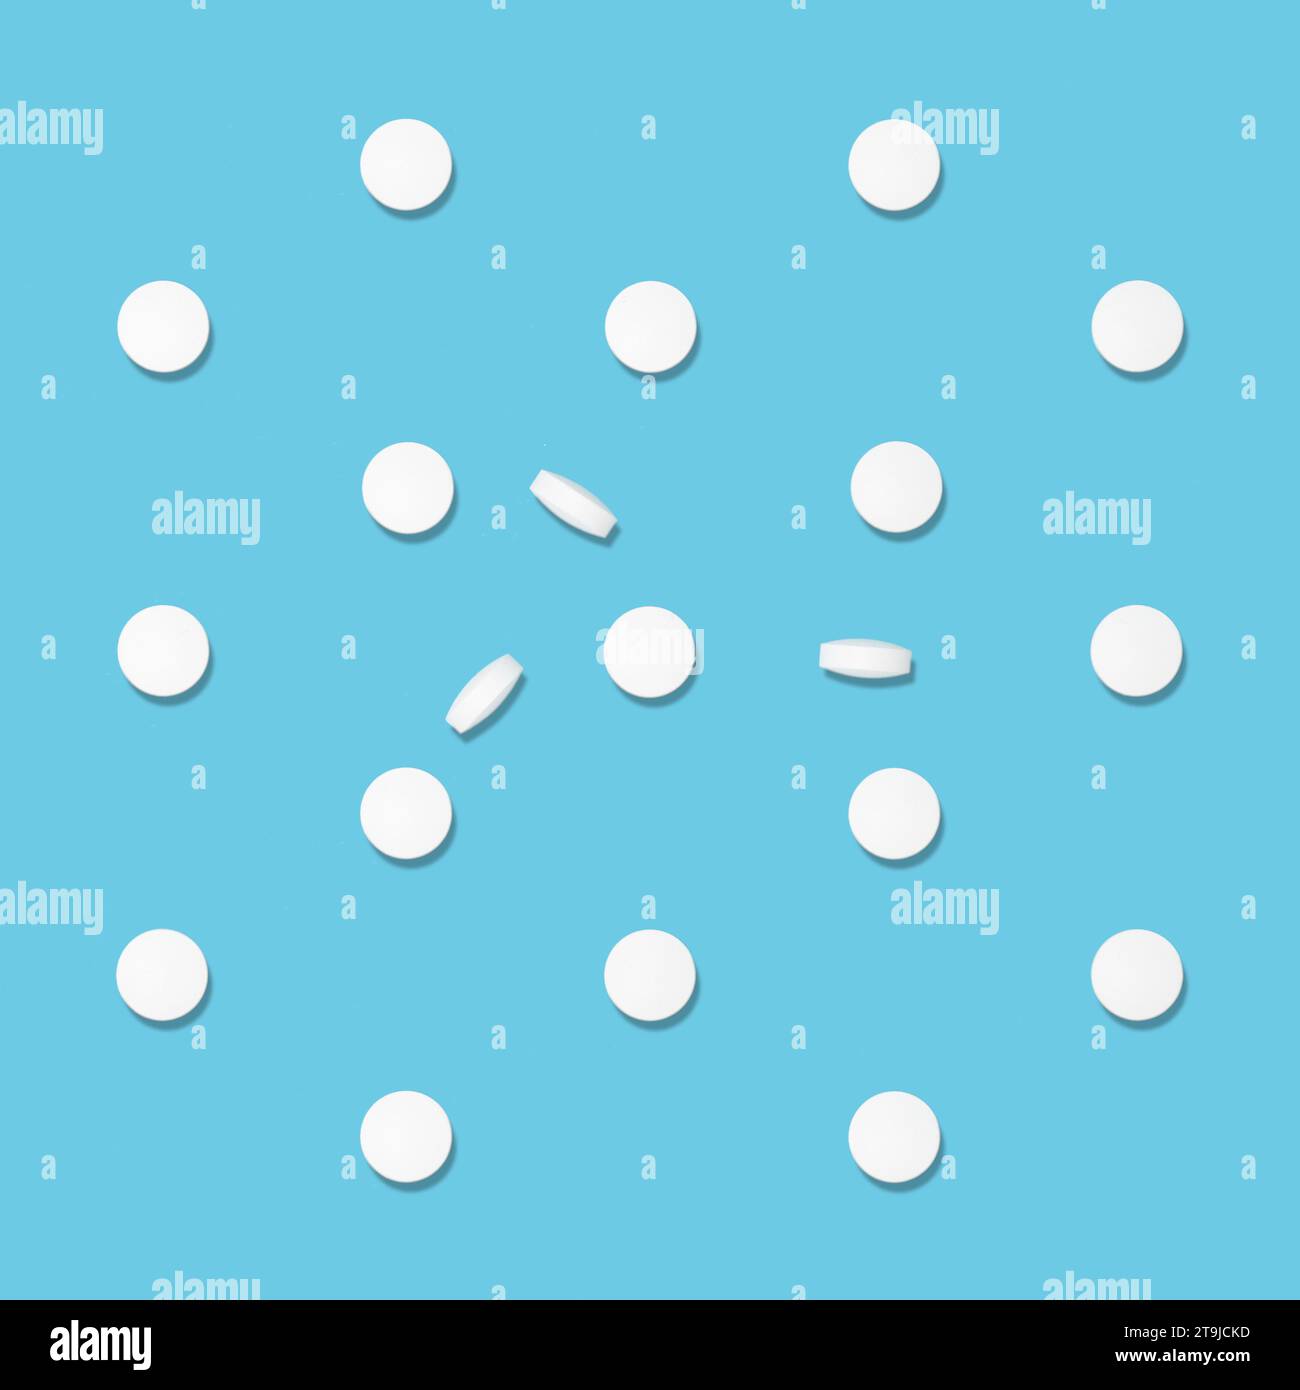 White tablets pattern in hard light on soft light blue color, top view. Medical and pharmacy remedies, home medicine chest. Stock Photo